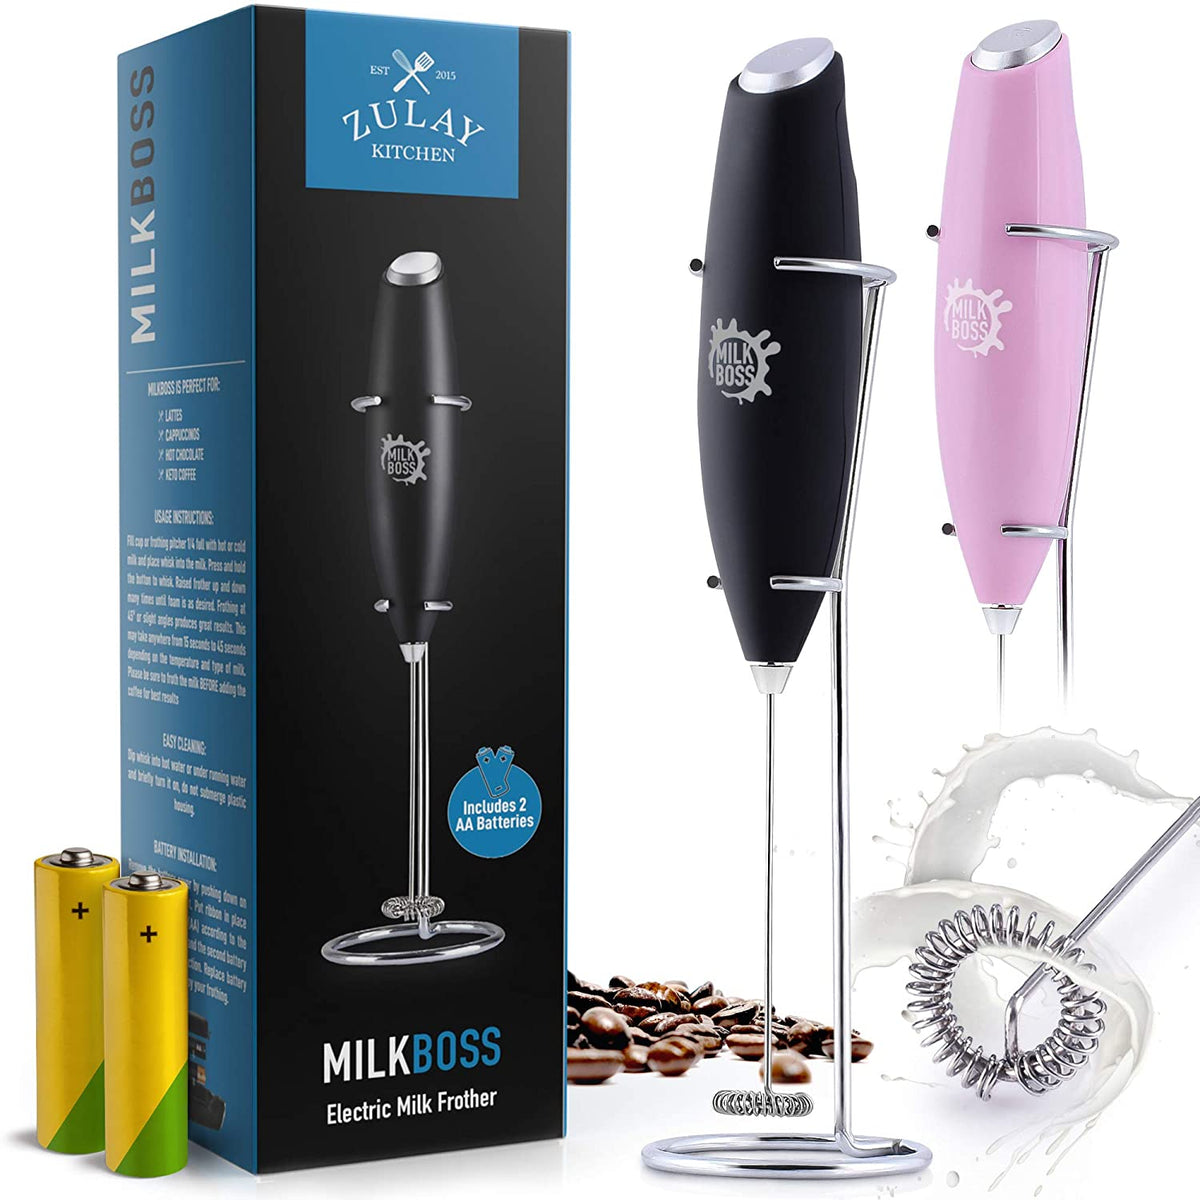 Zulay Kitchen Milk Boss Milk Frother with Holster Stand - Teal 